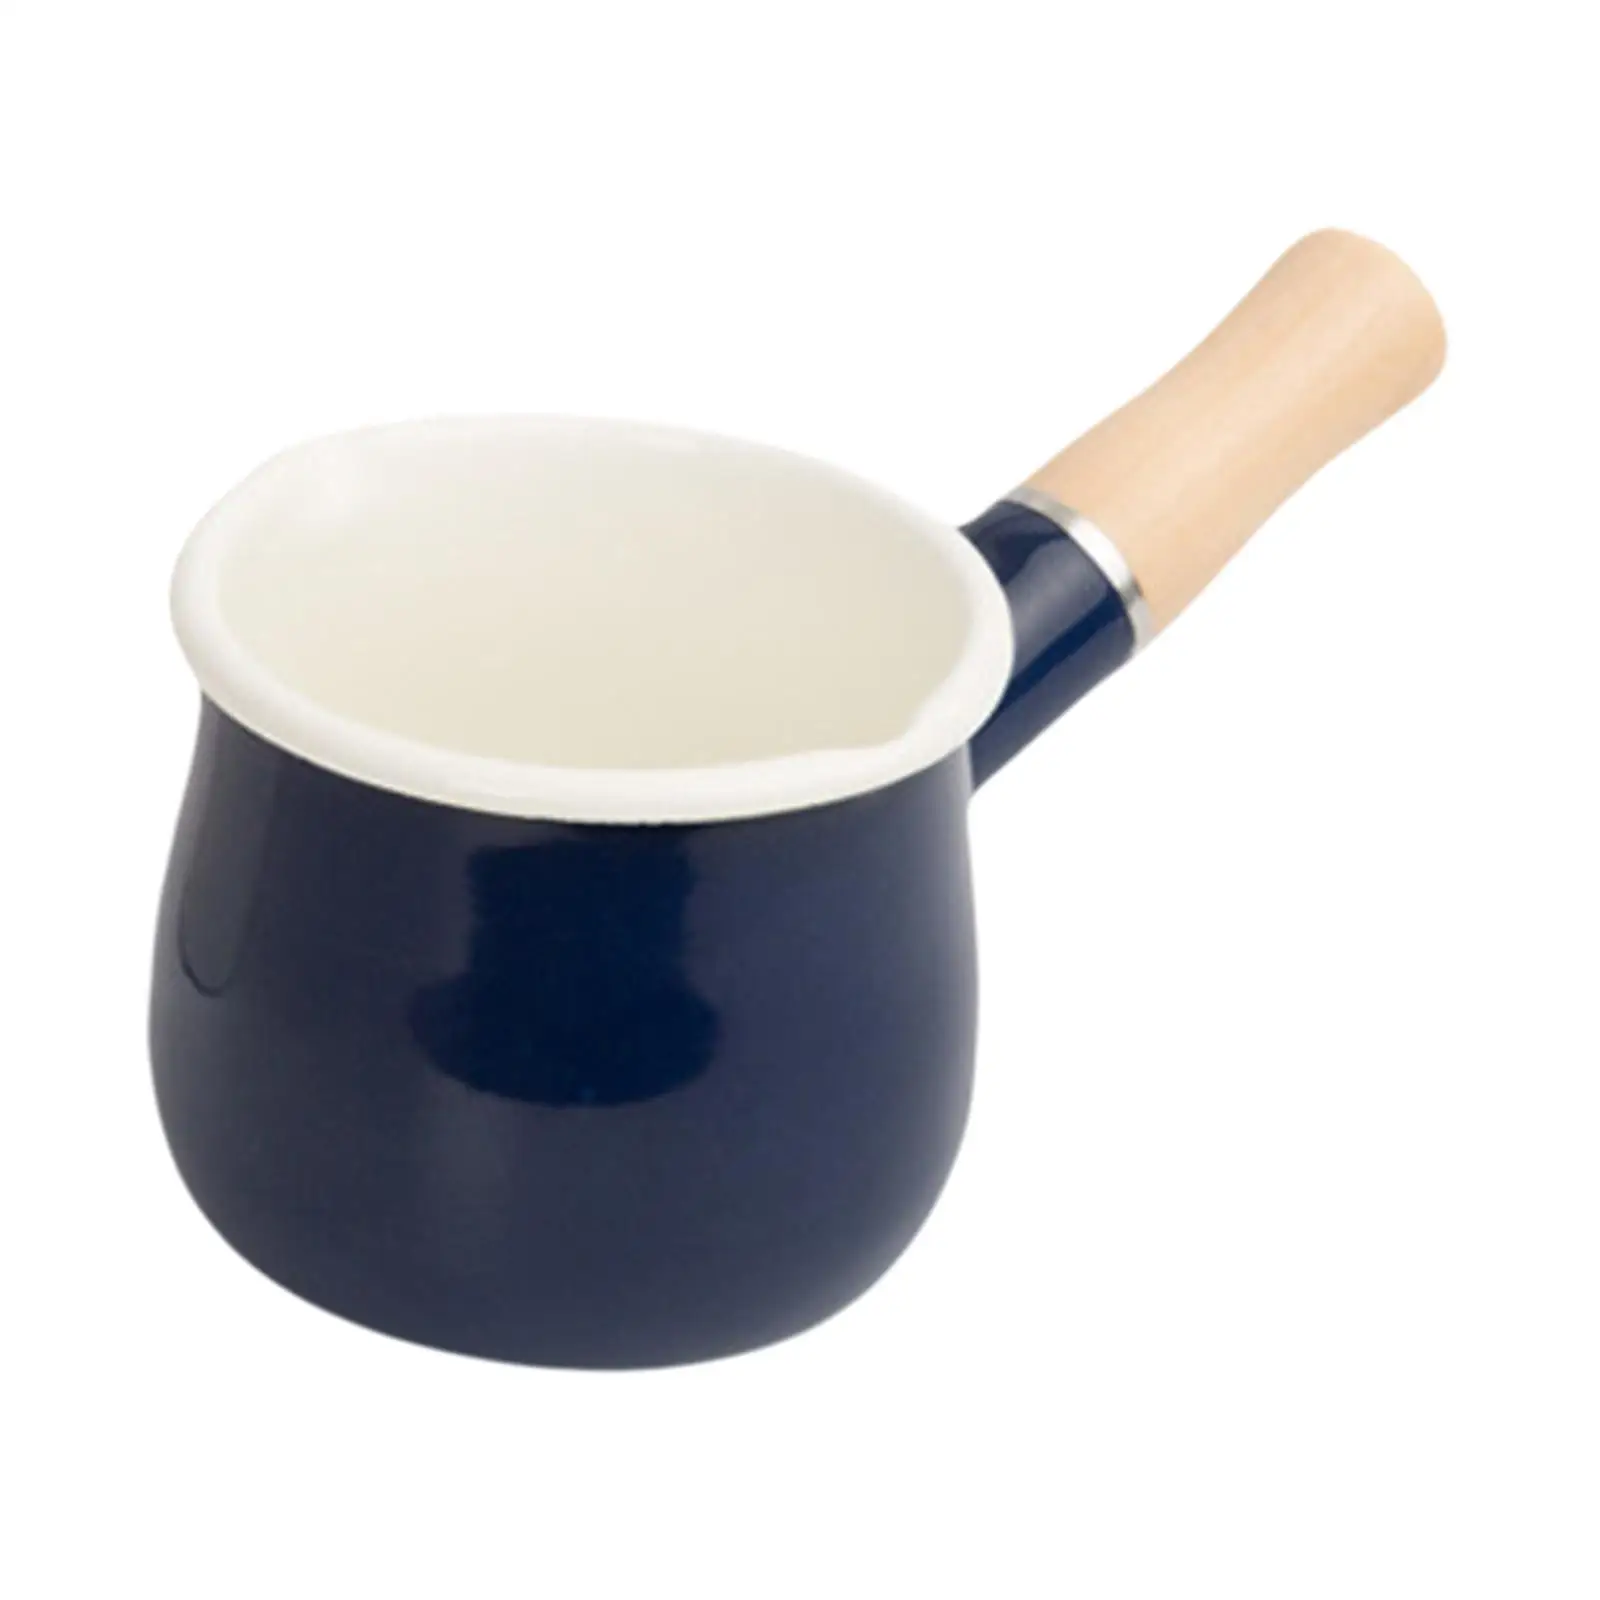 550ml Enamel Milk Pan Saucepan Butter Melter, with Pour Spout Cooking Non Stick Small Cookware Sauce Pan for Heating Milk Noodle